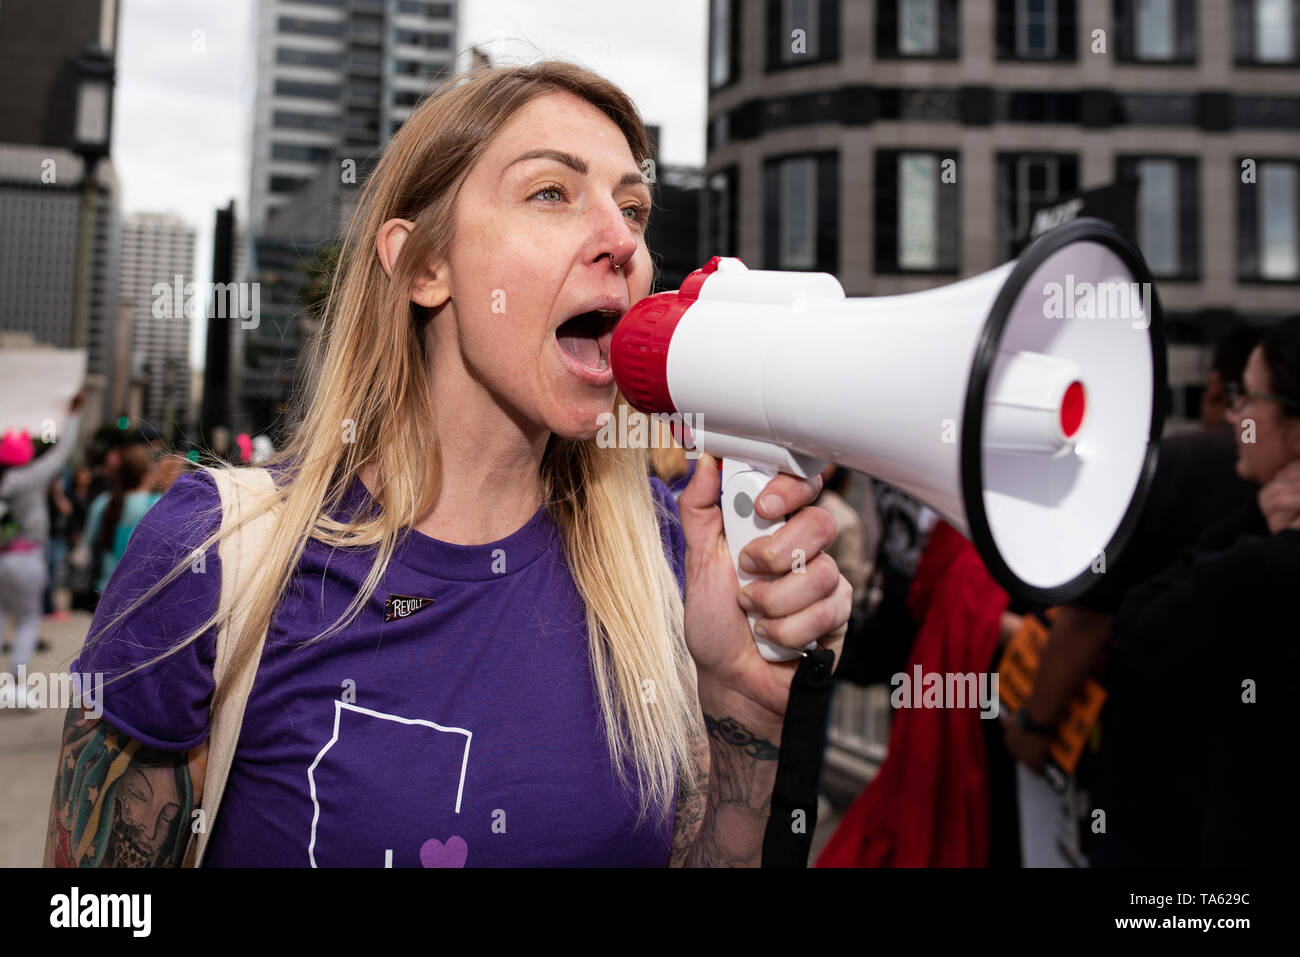 An activist seen chanting slogans on a megaphone during the protest. Women rights activists protested against restrictions on abortions after Alabama passed the most restrictive abortion bans in the US. Similar Stop the Bans Day of Action for Abortion Rights rallies were held across the nation. Stock Photo